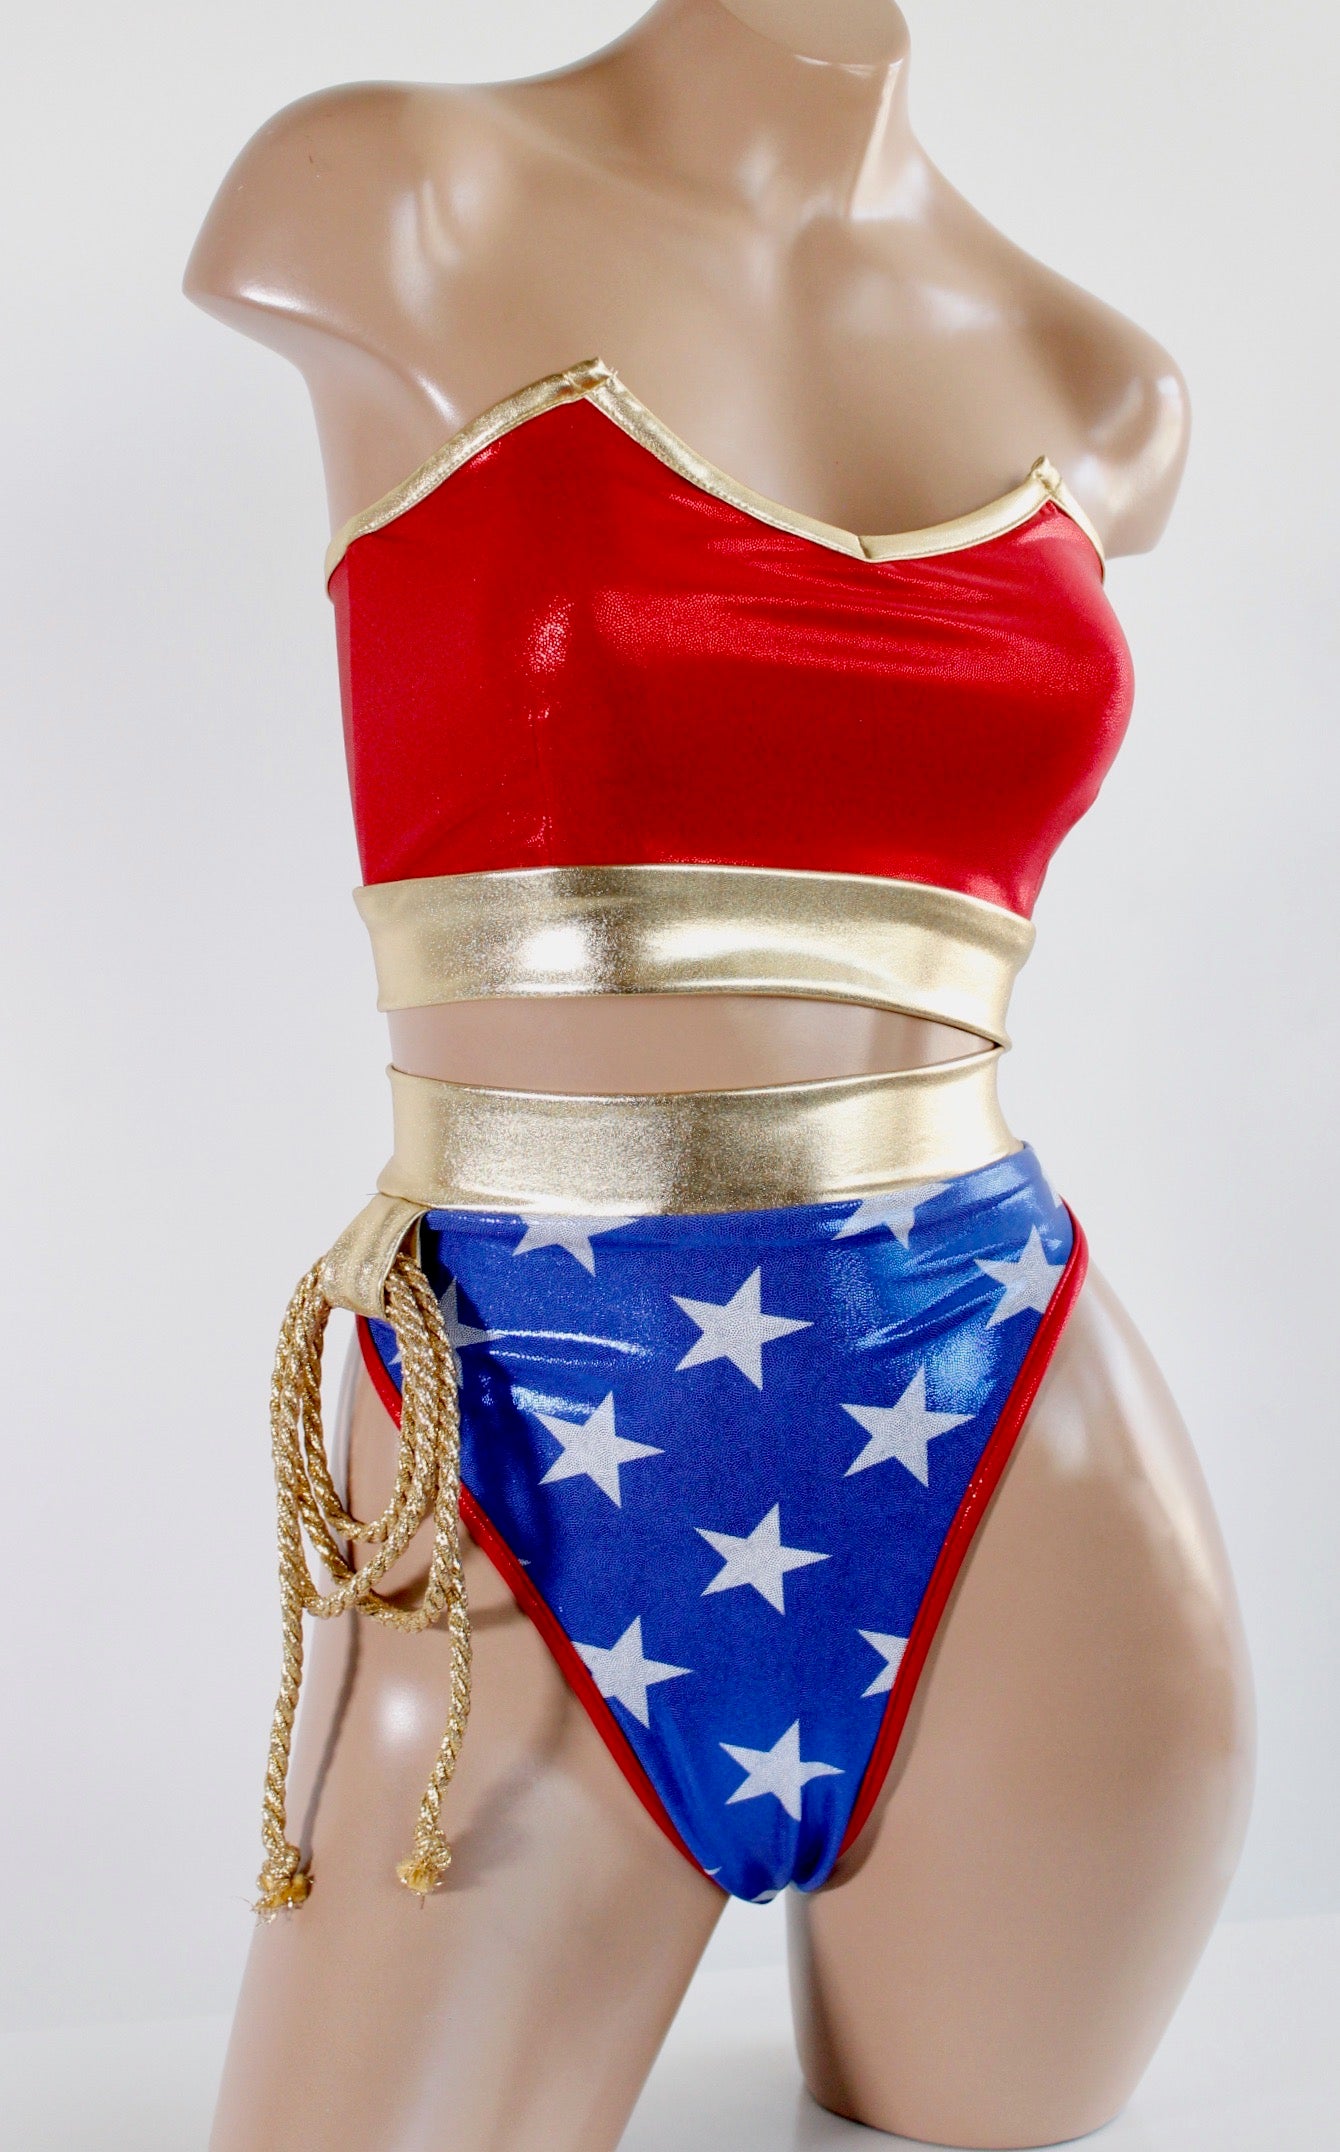 Star Superheroine Bustier Top and Highcut Thong - The Sugarpuss Collection